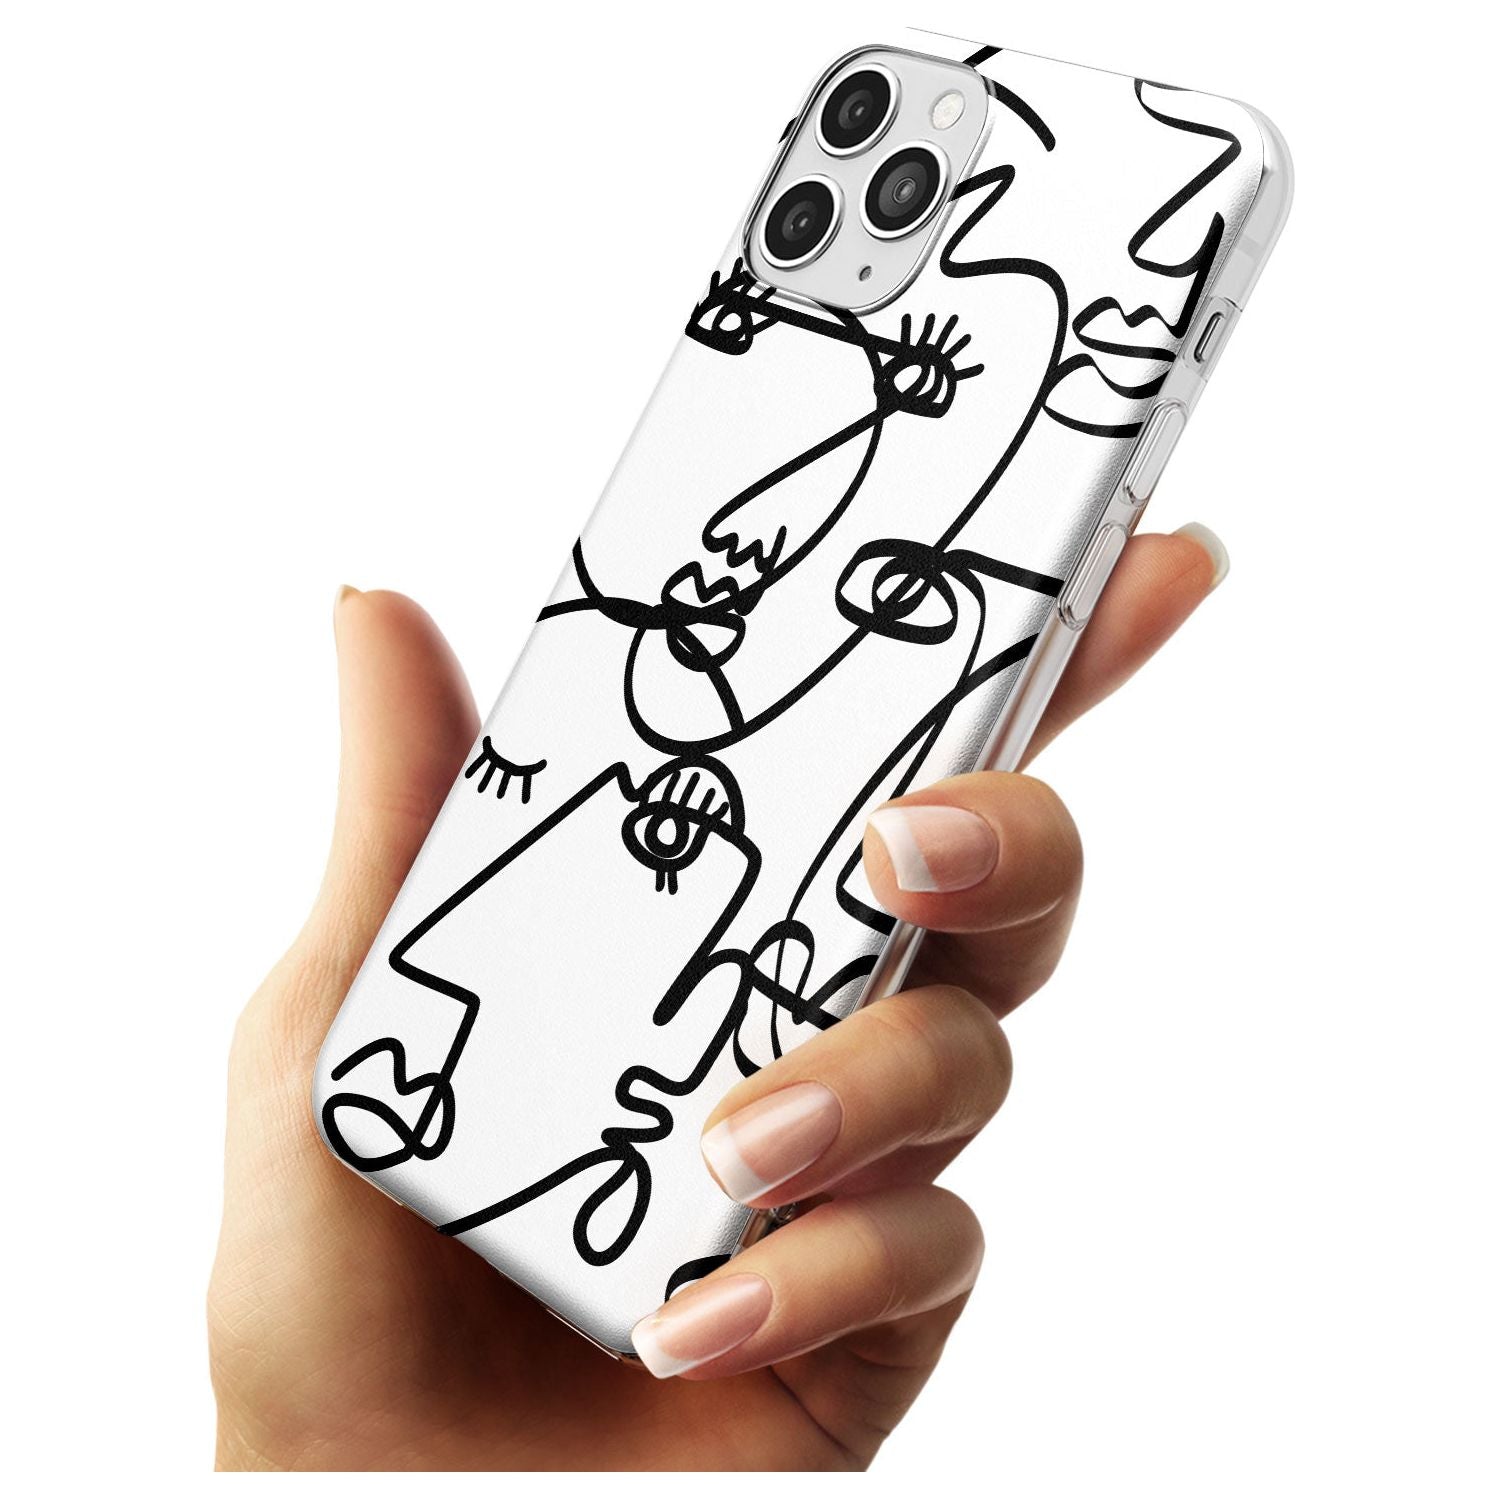 Continuous Line Faces: Black on White Black Impact Phone Case for iPhone 11 Pro Max